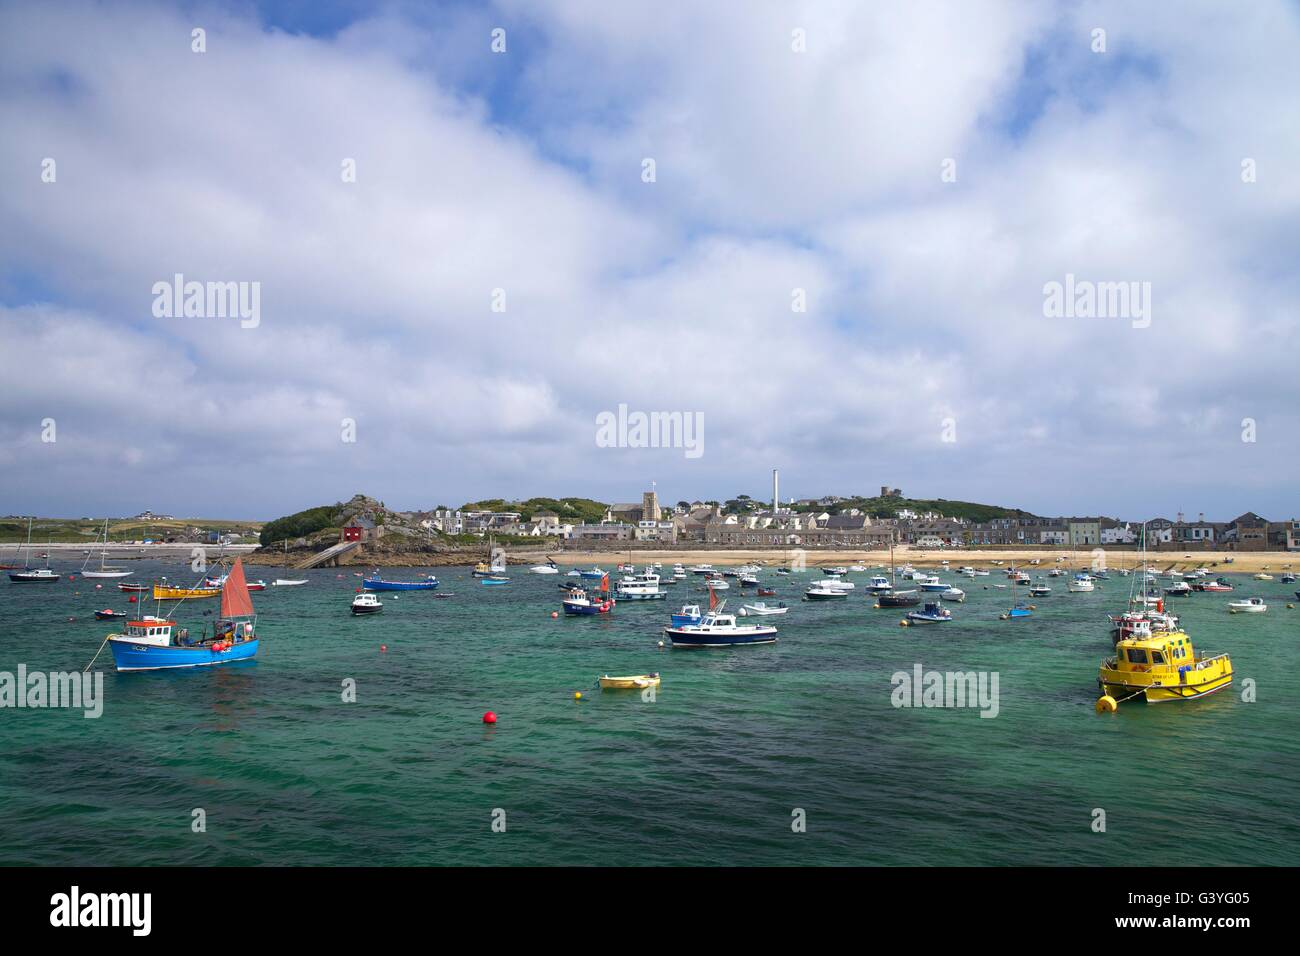 Boats in harbour, St Mary's, Isles of Scilly, Cornwall, England, UK, GB Stock Photo